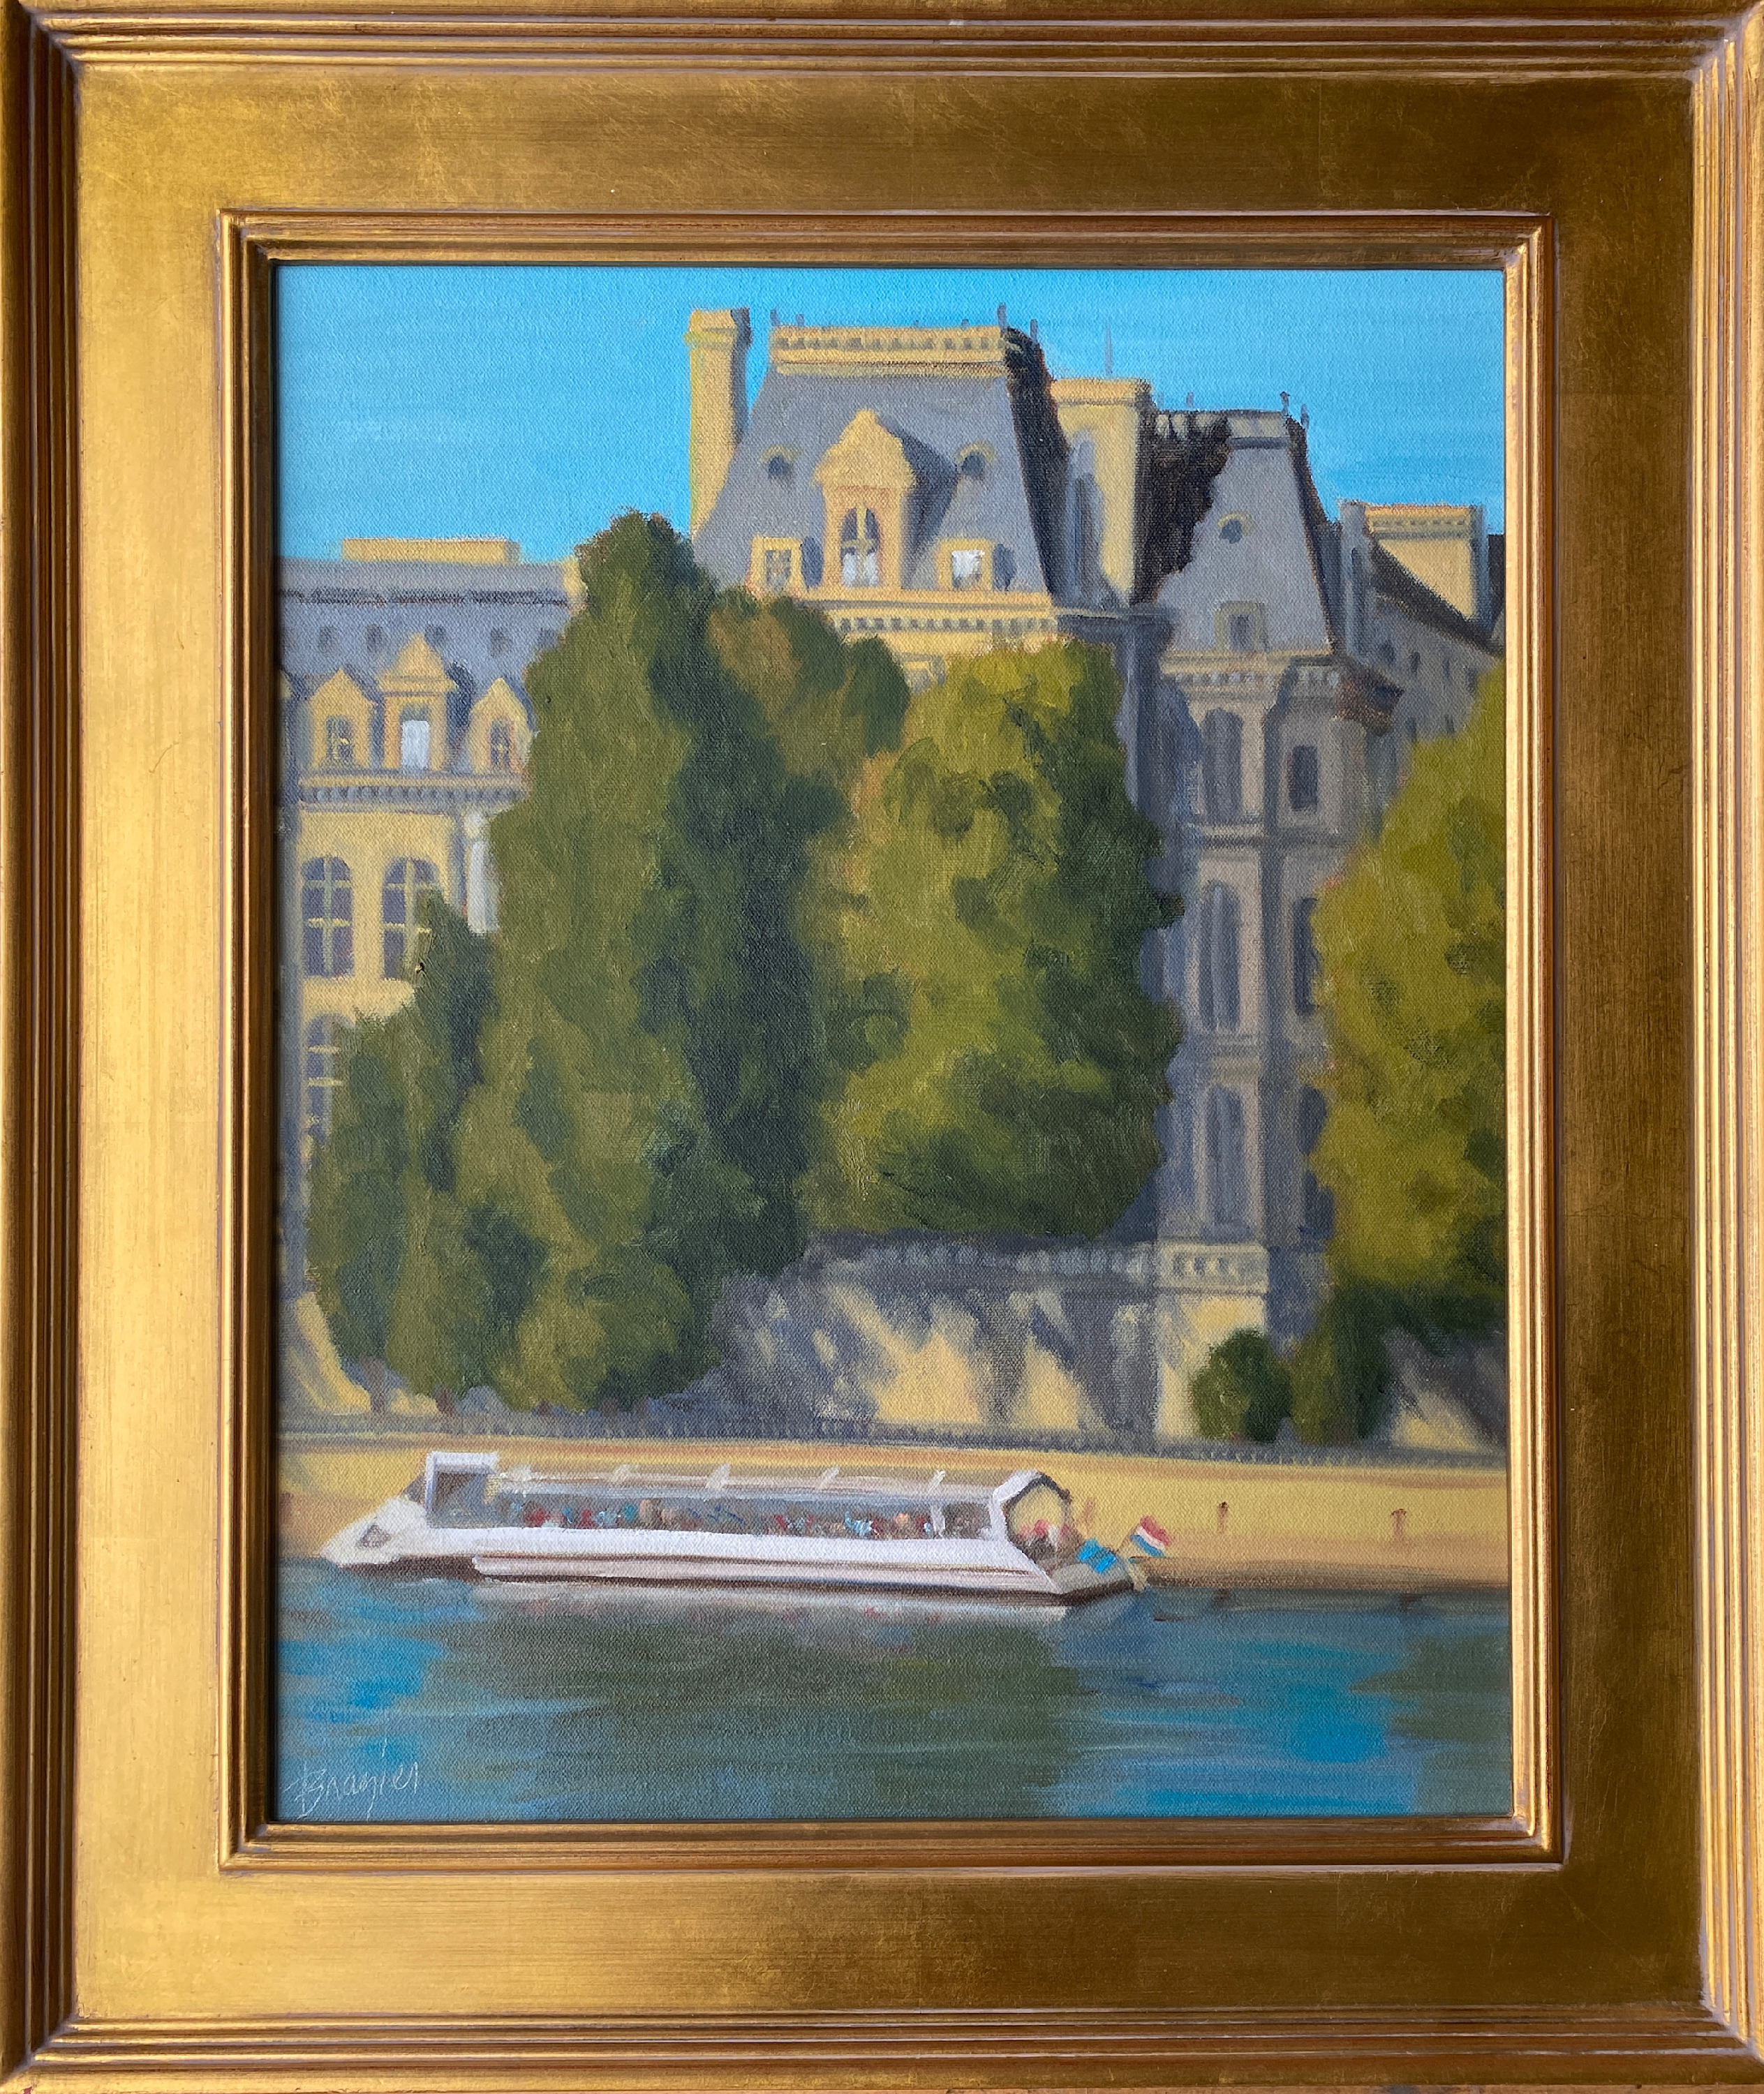 Loryn brazier a great day to barge down the seine 20x16 nf2sut